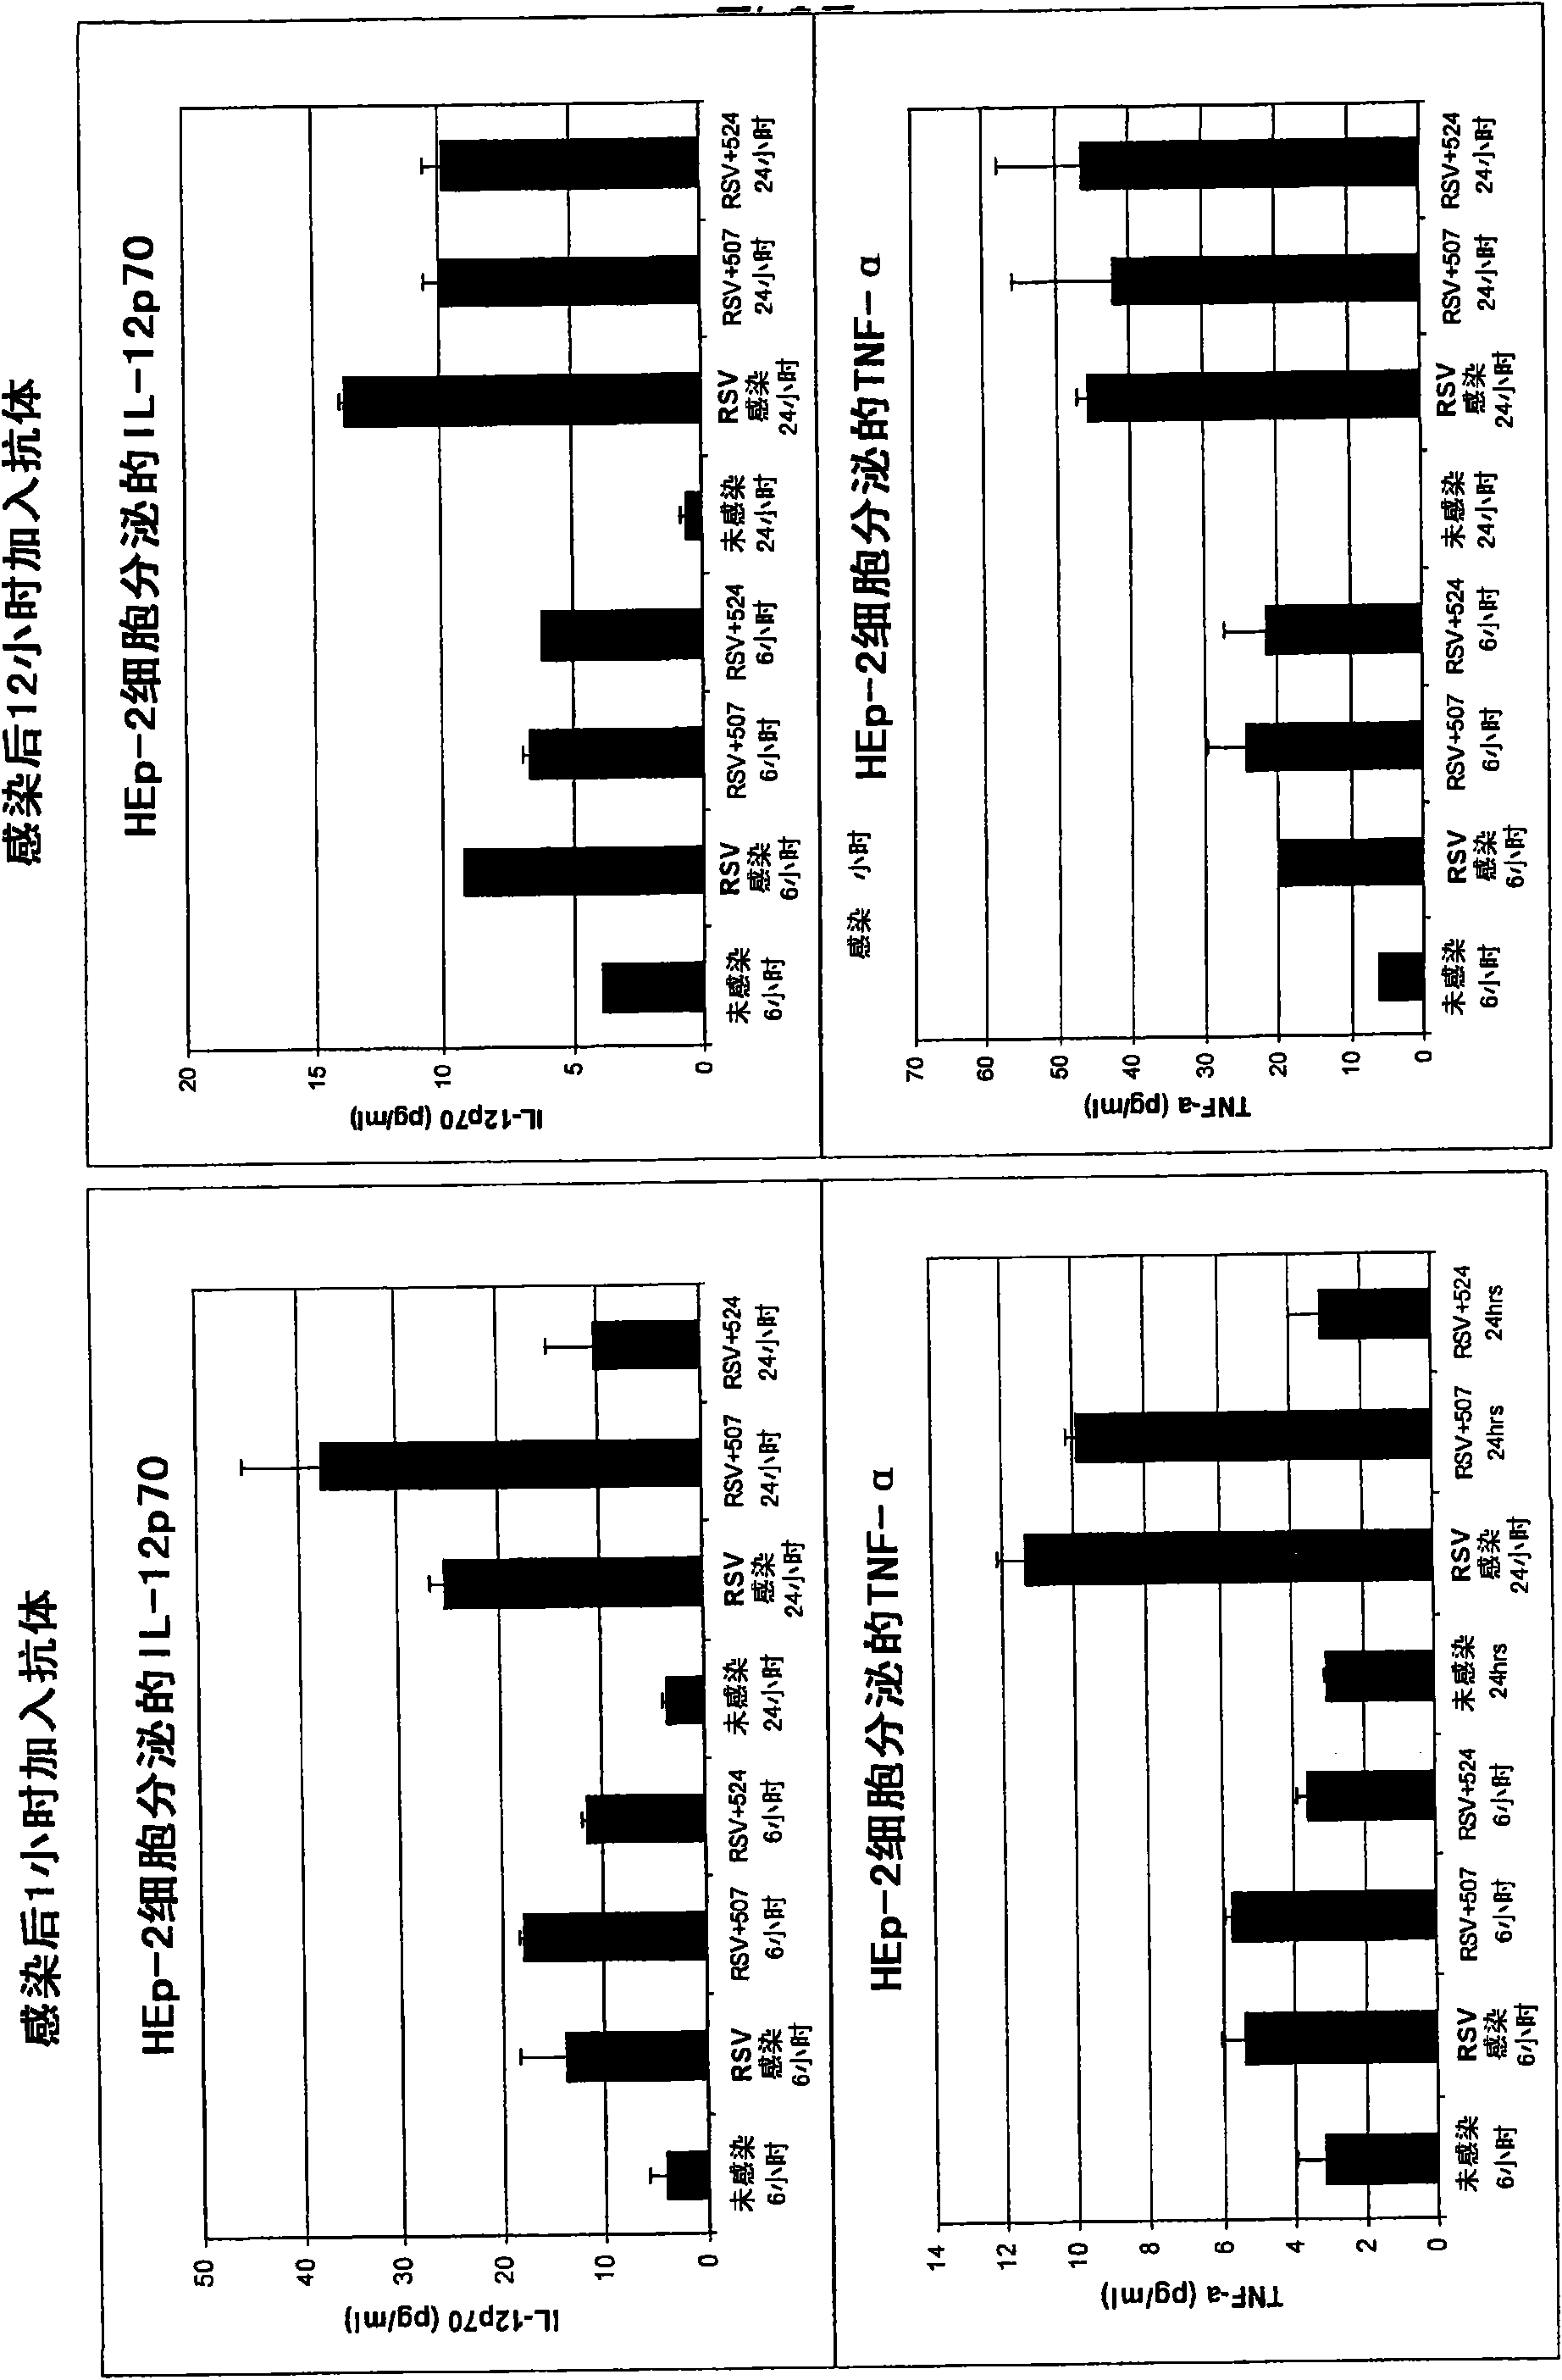 Methods of treating RSV infections and related conditions